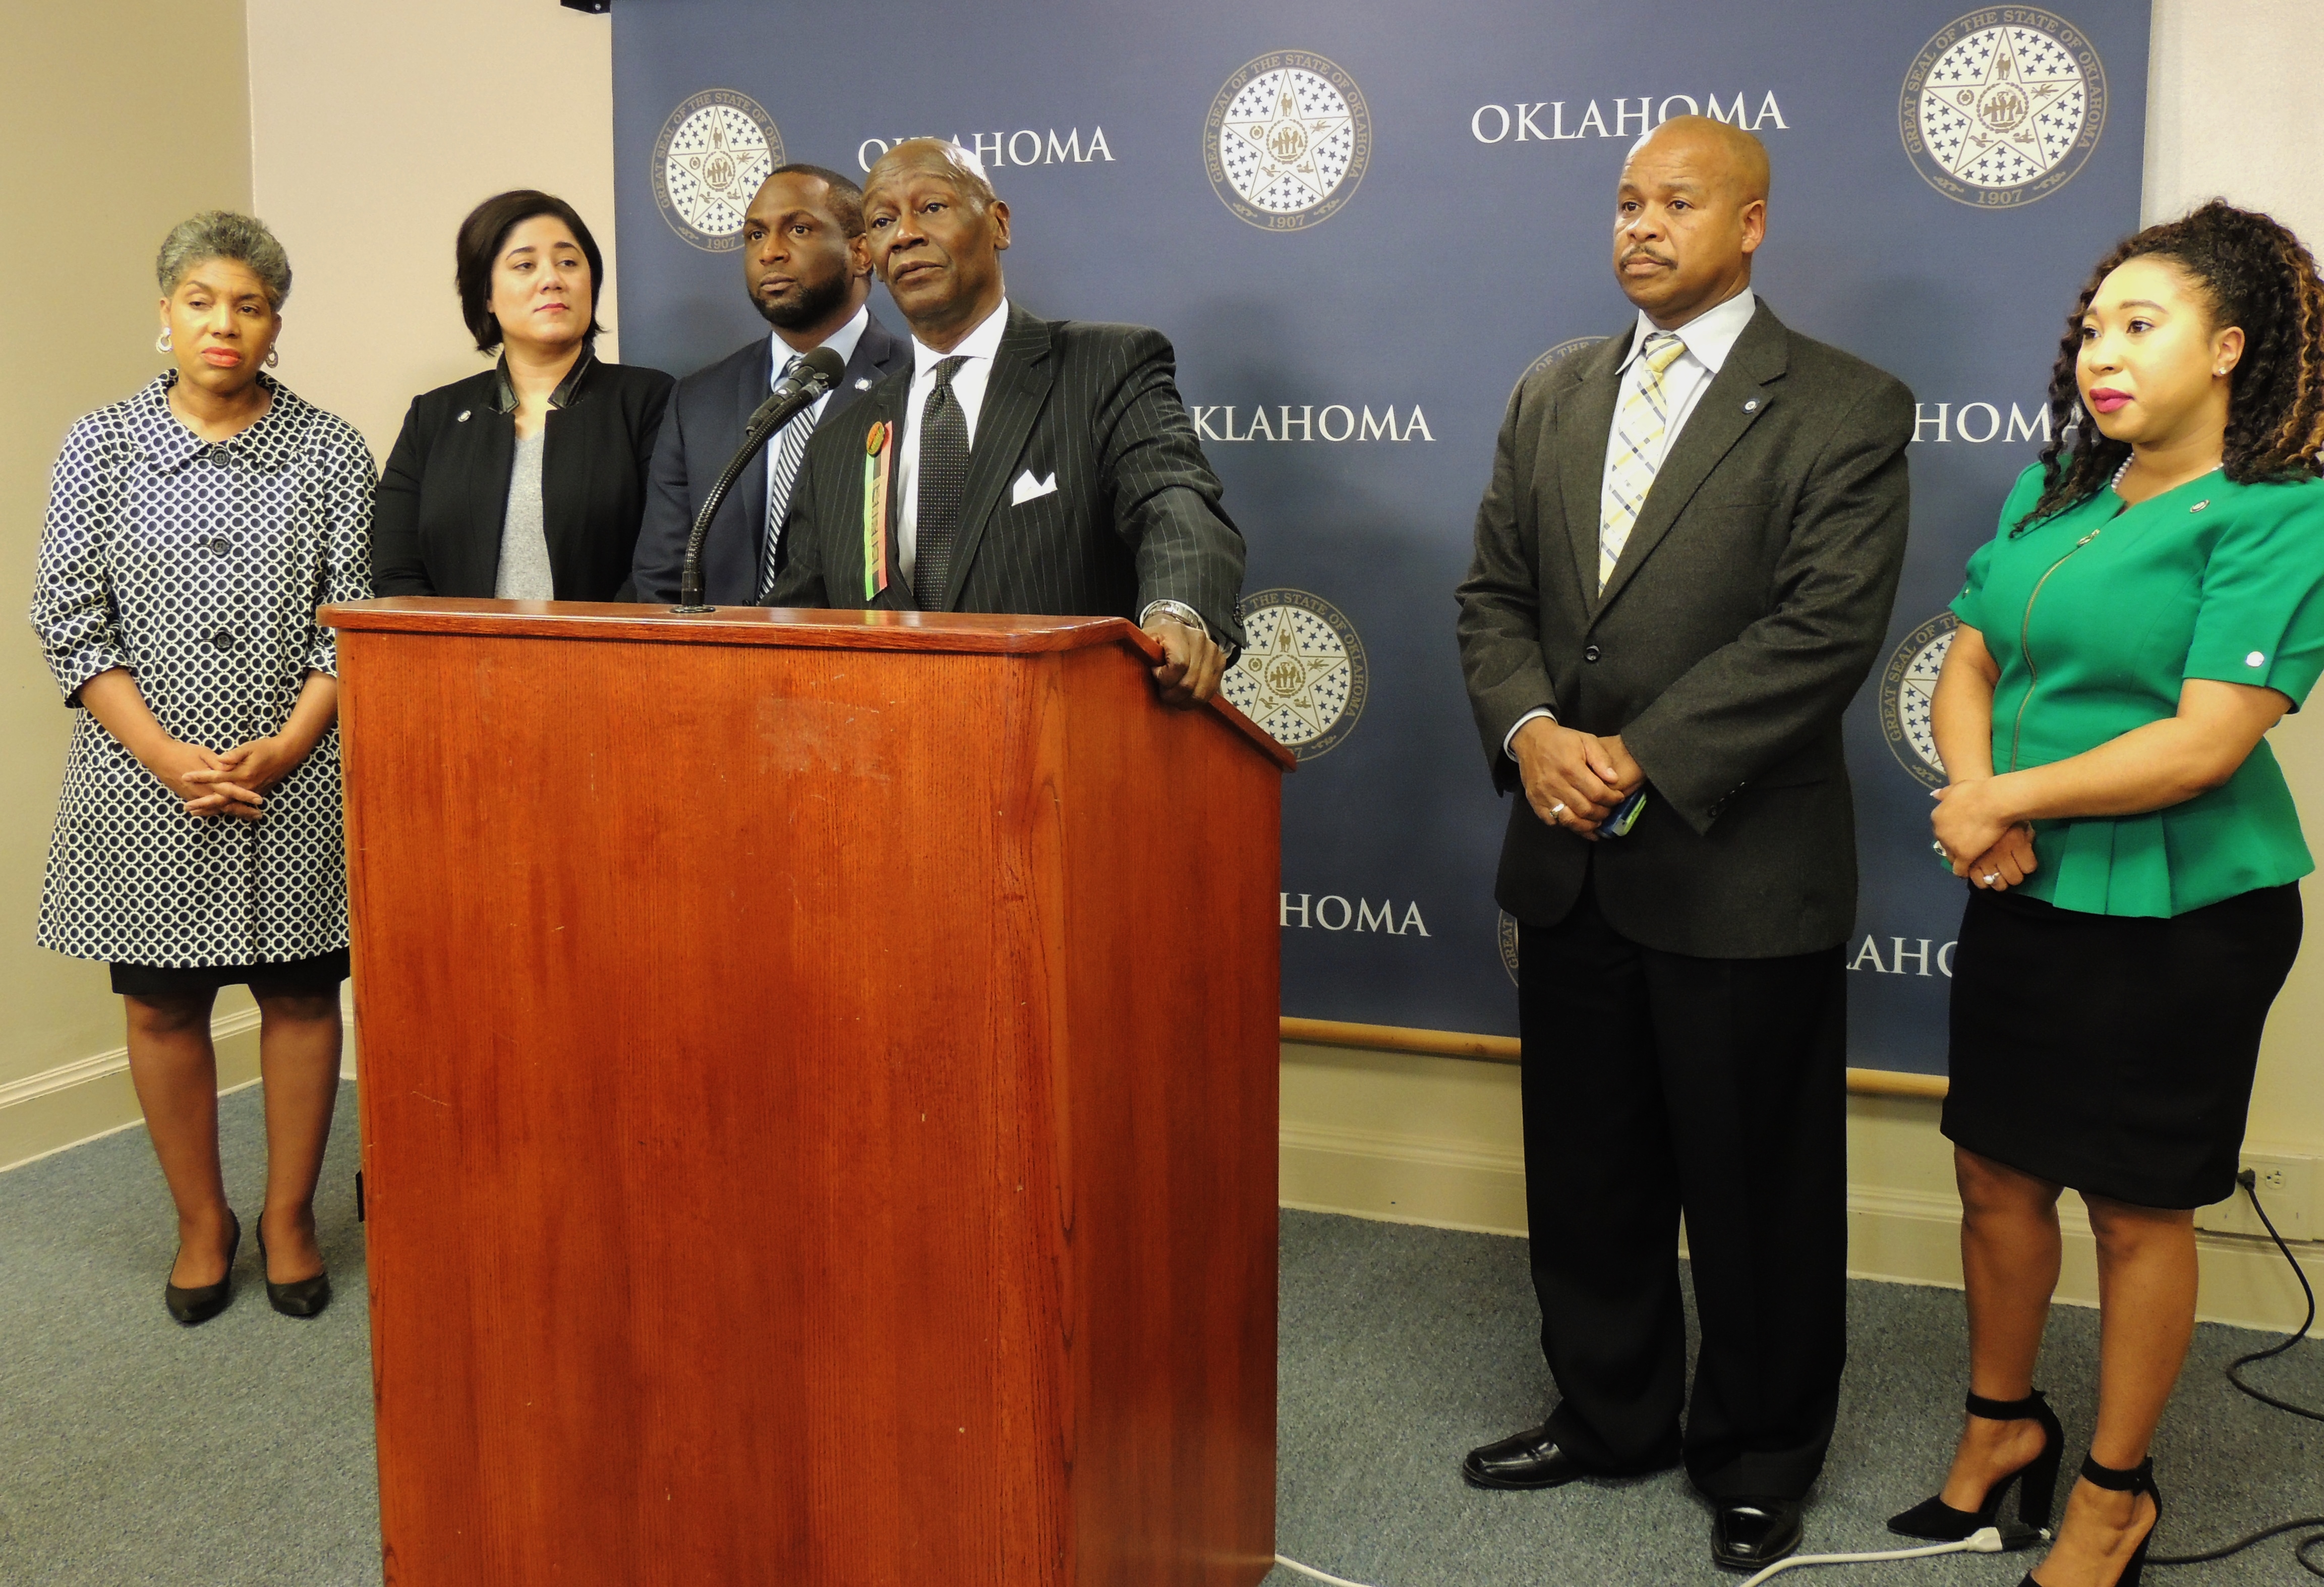 Legislative Black Caucus members outline diversity and cultural reforms for OU at a press conference Friday, February 1 at the State Capitol.  Pictured from left to right are: Rep. Regina Goodwin, Rep. Merelyn Bell, Rep. Jason Lowe, Sen. George Young, Se